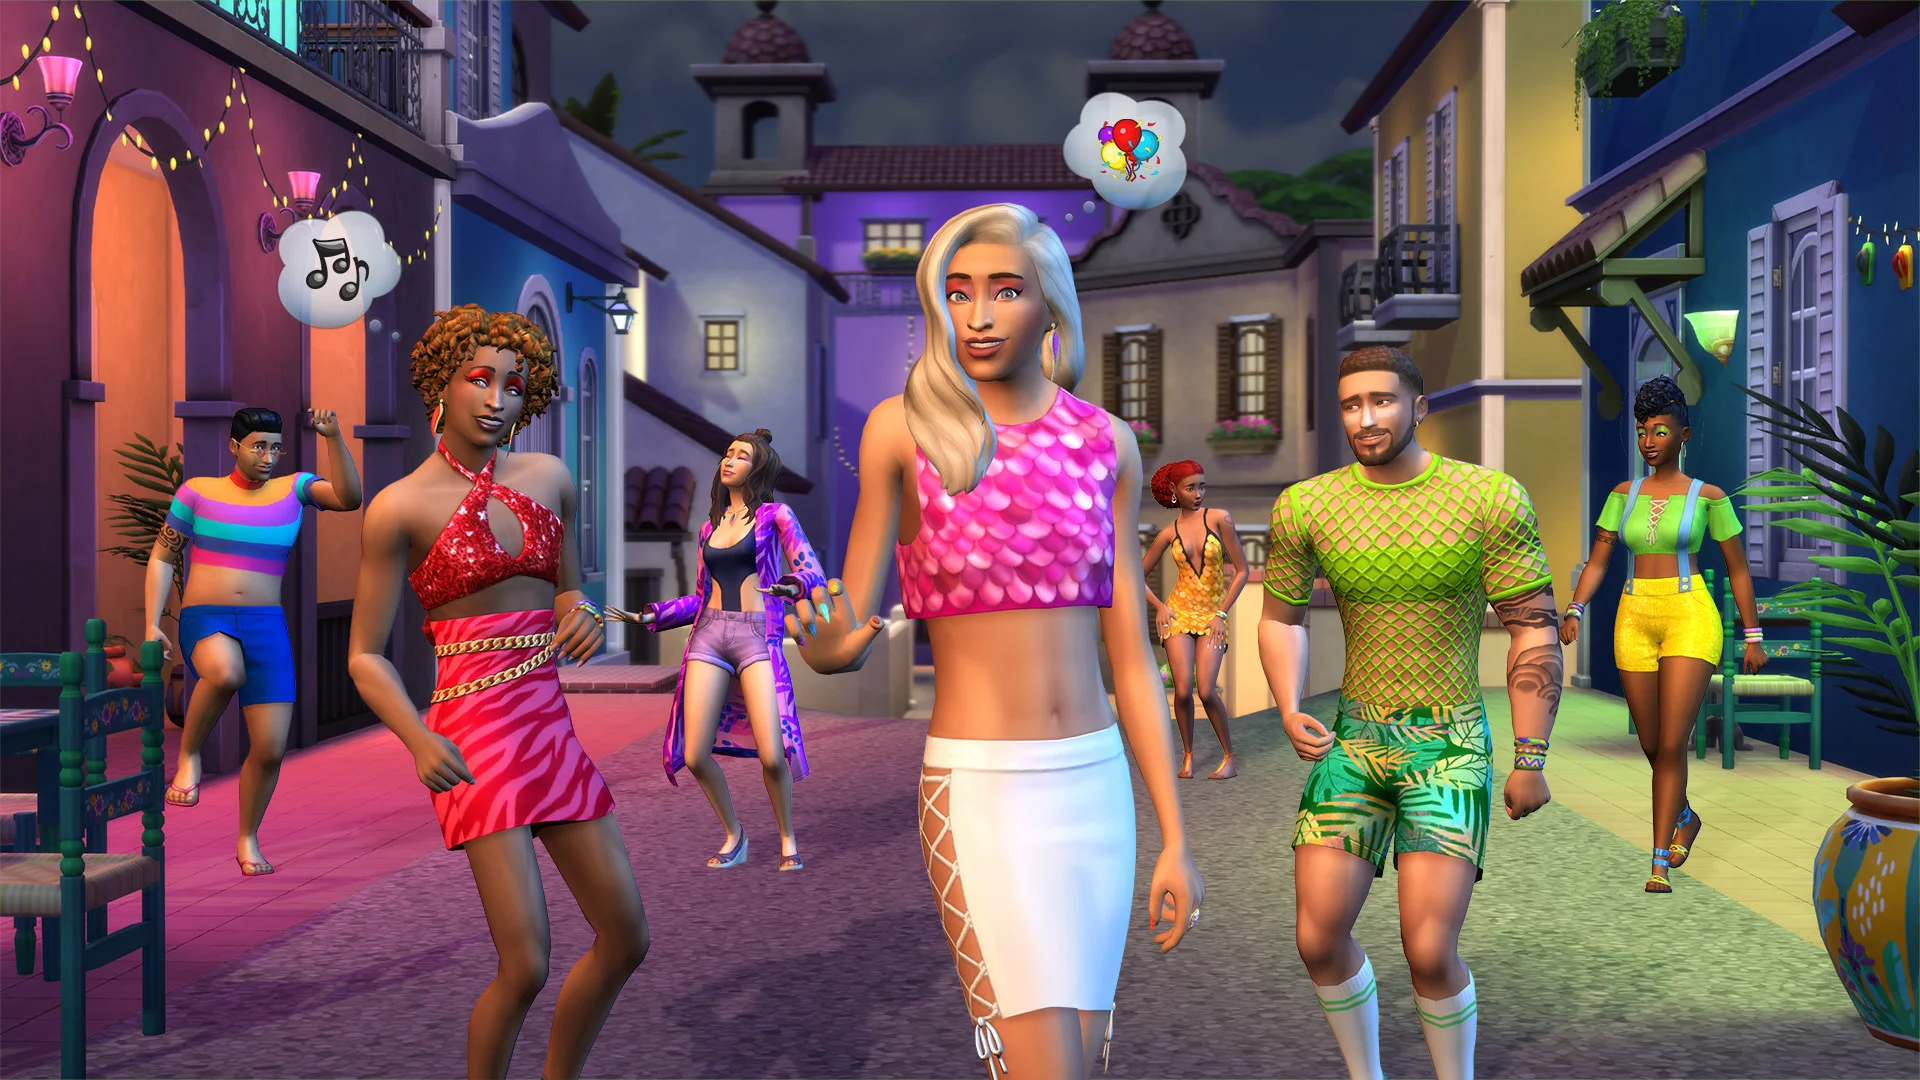 There may be 15 updates coming to The Sims 4